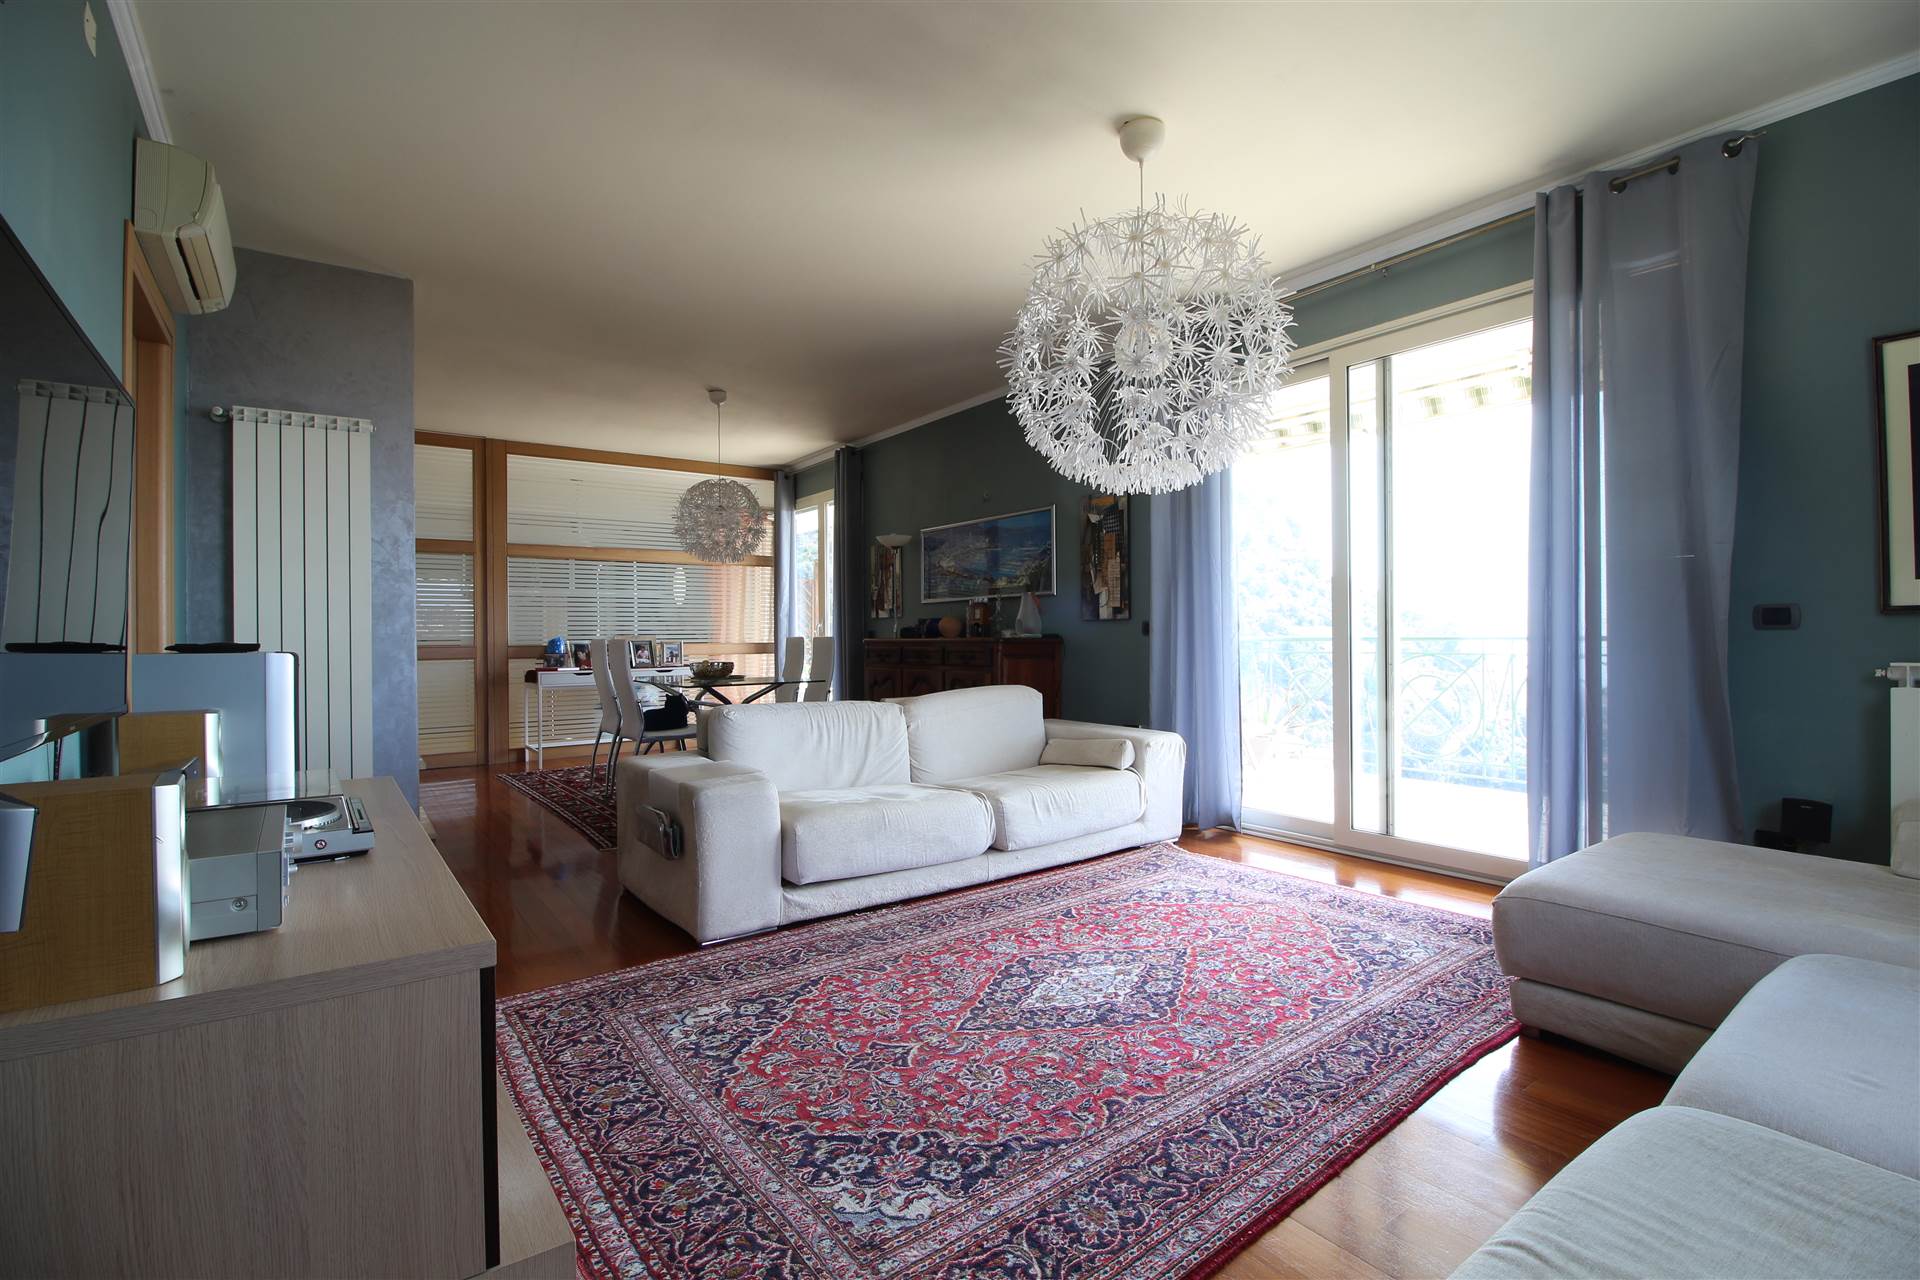 CENTRO, VENTIMIGLIA, Apartment for sale of 117 Sq. mt., Excellent Condition, Heating Individual heating system, Energetic class: D, placed at 3°, 